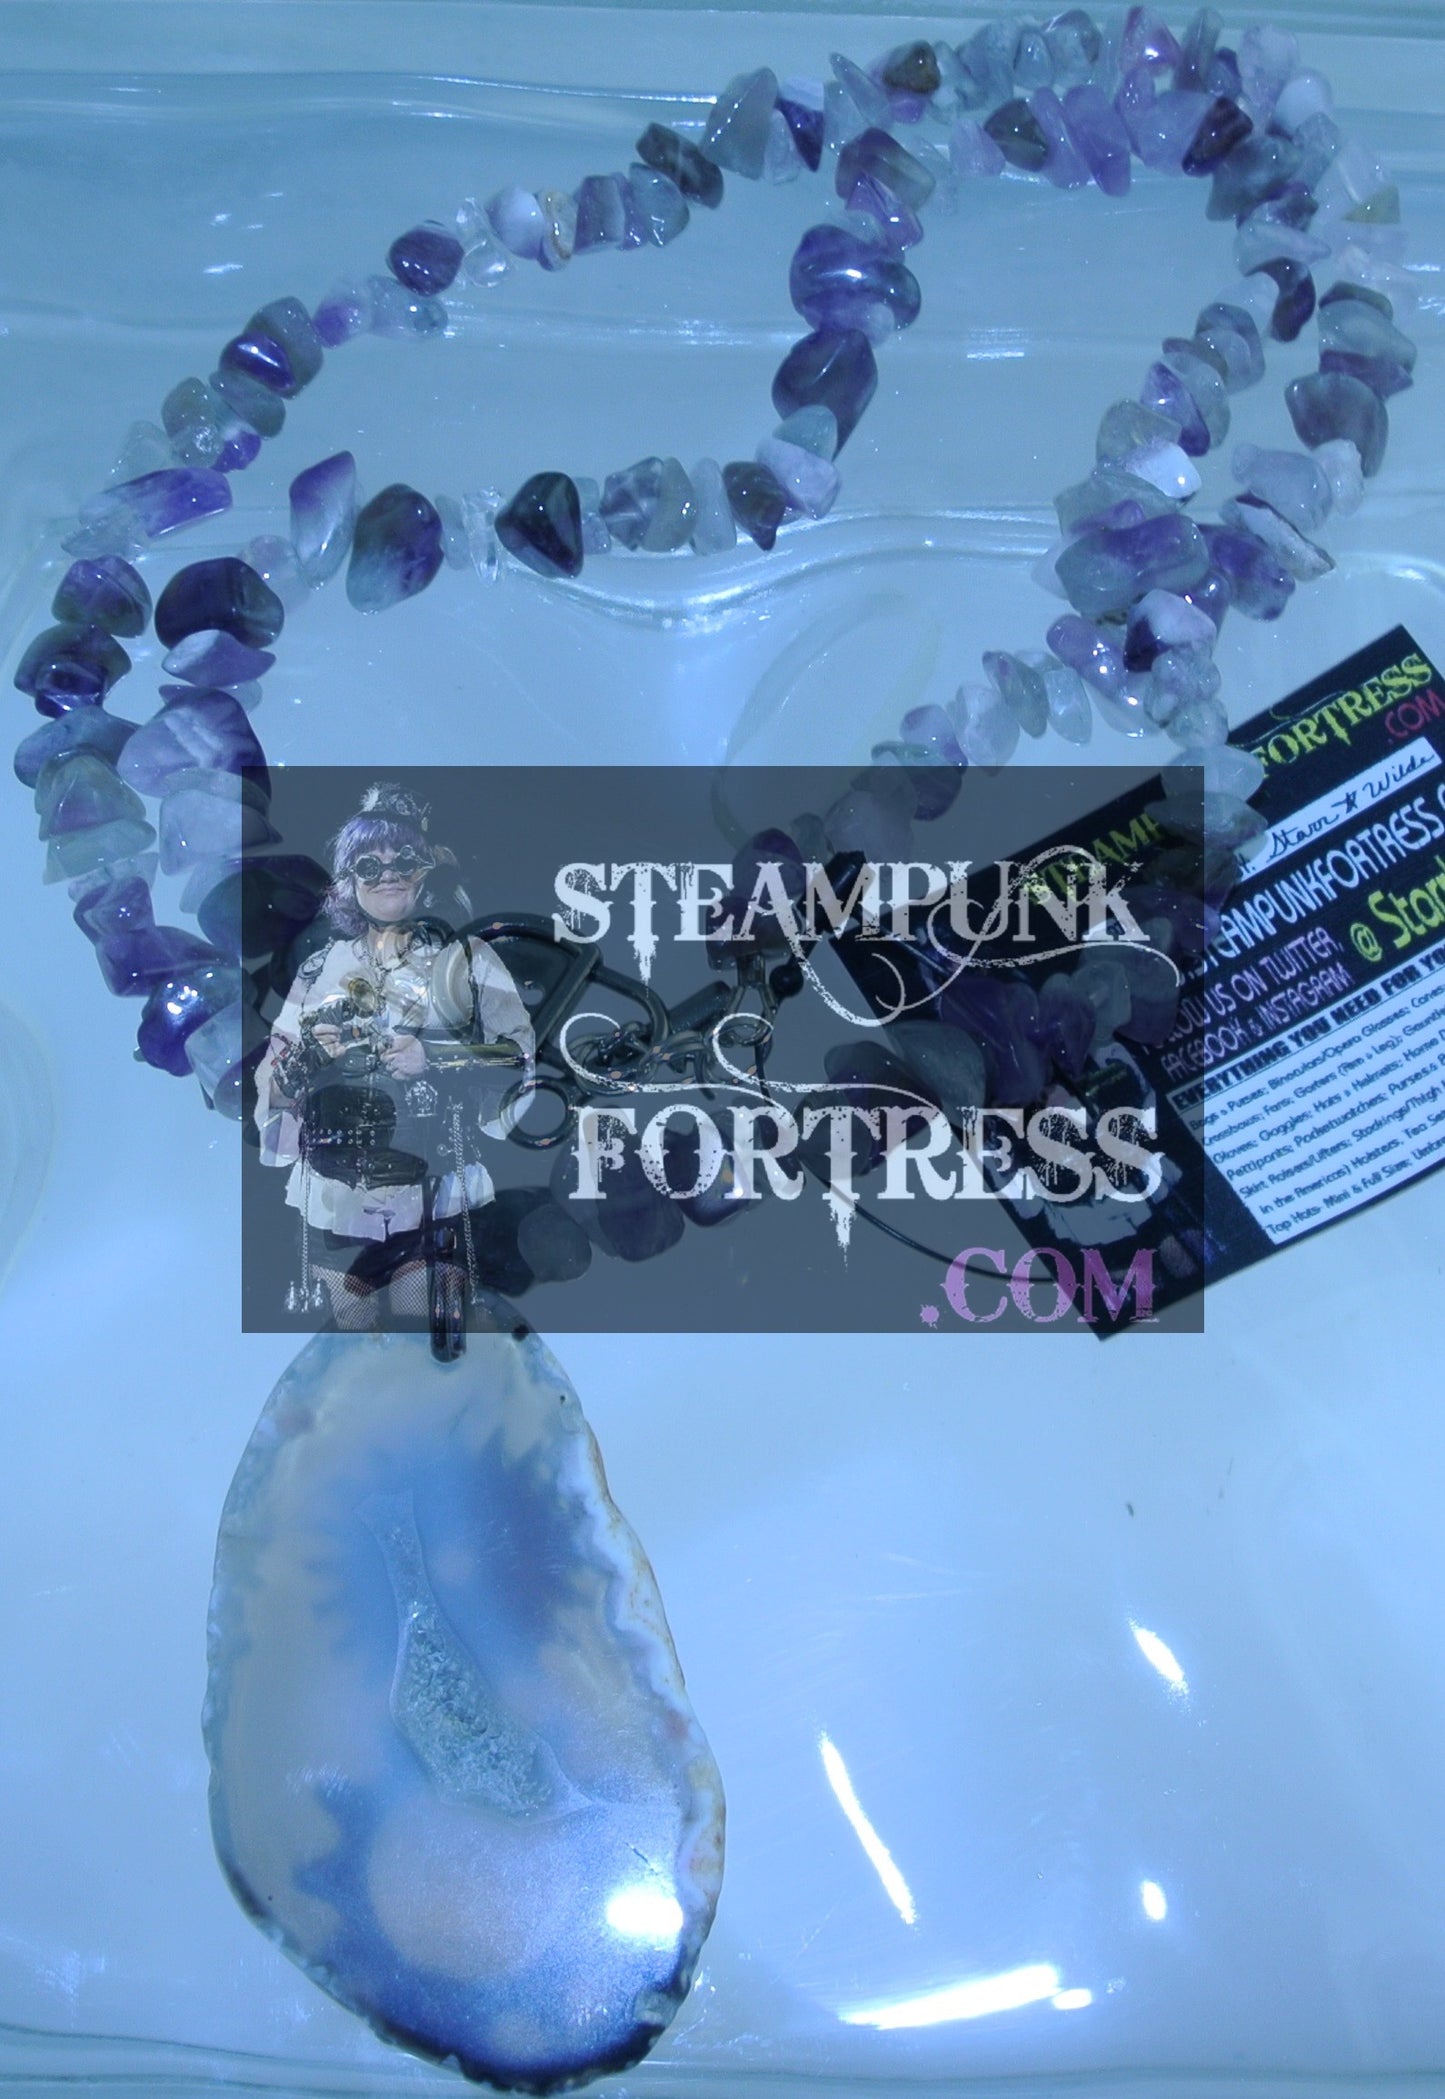 SILVER AMETHYST SLAB GEMSTONES STONES FOCAL 2 SILVER TH GEARS CHIPS NECKLACE SET AVAILABLE 2 SIDED REVERSIBLE STARR WILDE STEAMPUNK FORTRESS